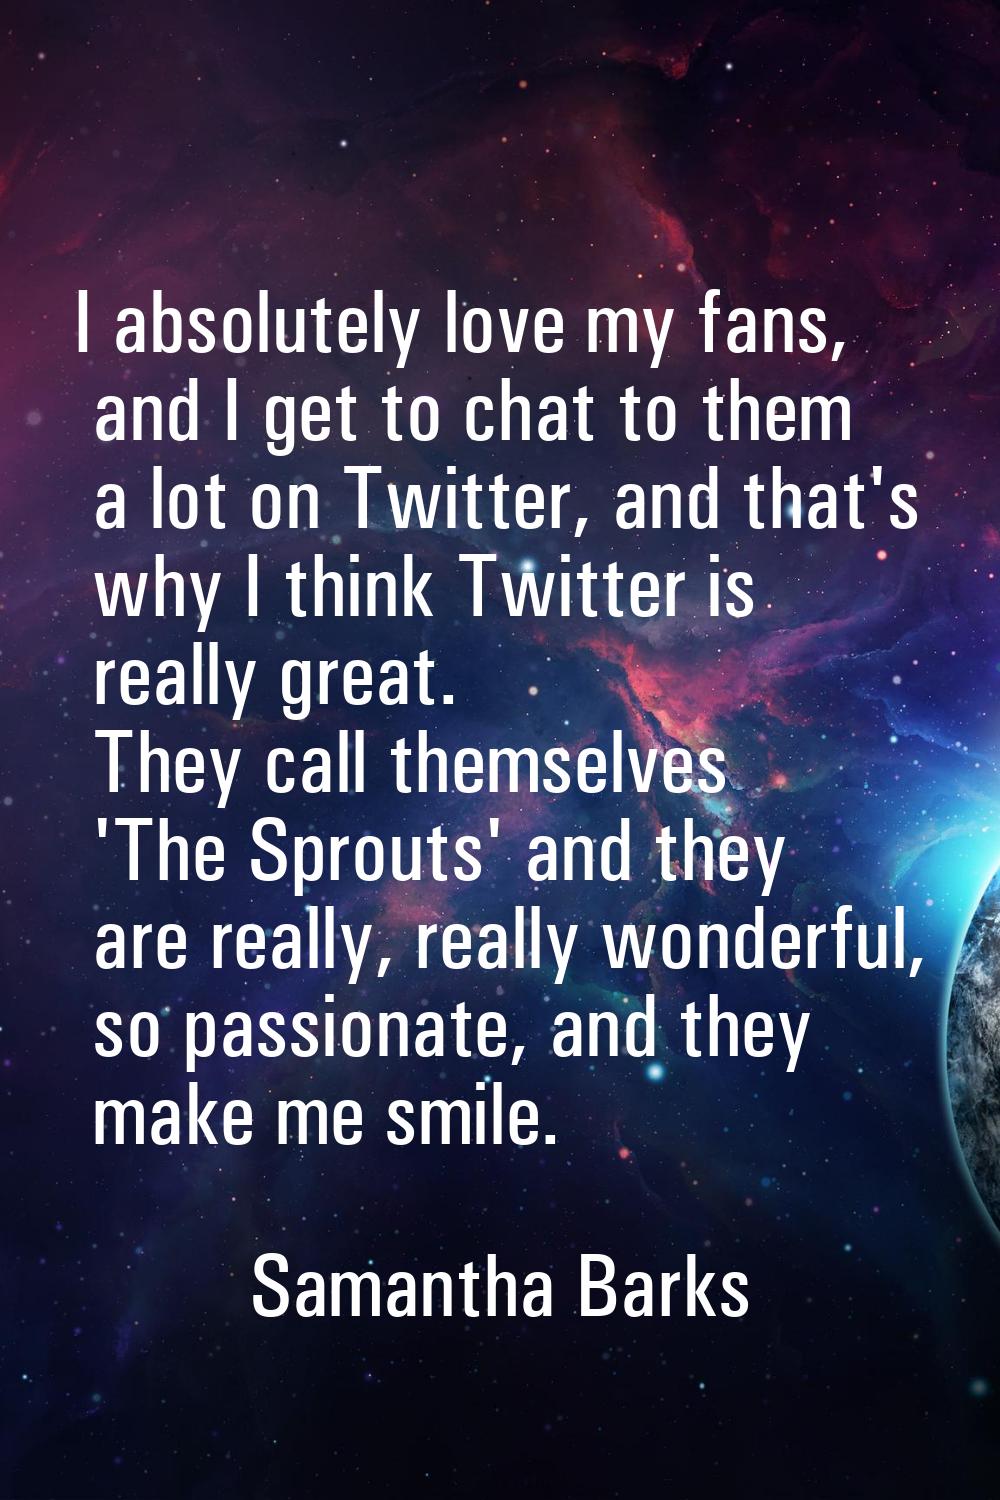 I absolutely love my fans, and I get to chat to them a lot on Twitter, and that's why I think Twitt